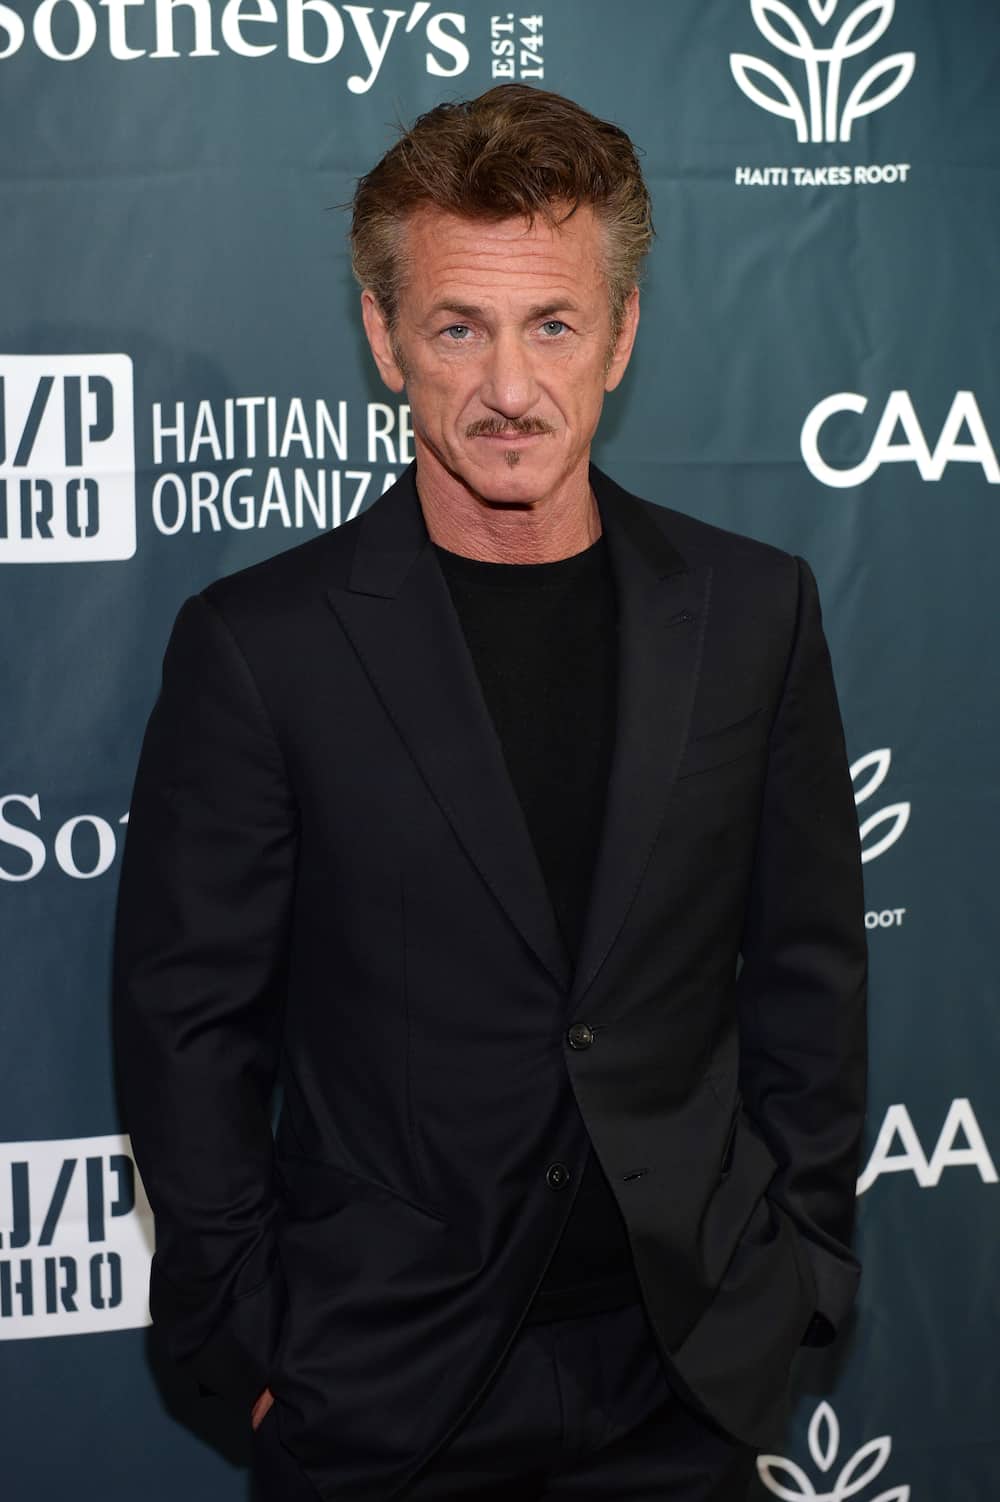 Sean Penn's movies and TV shows